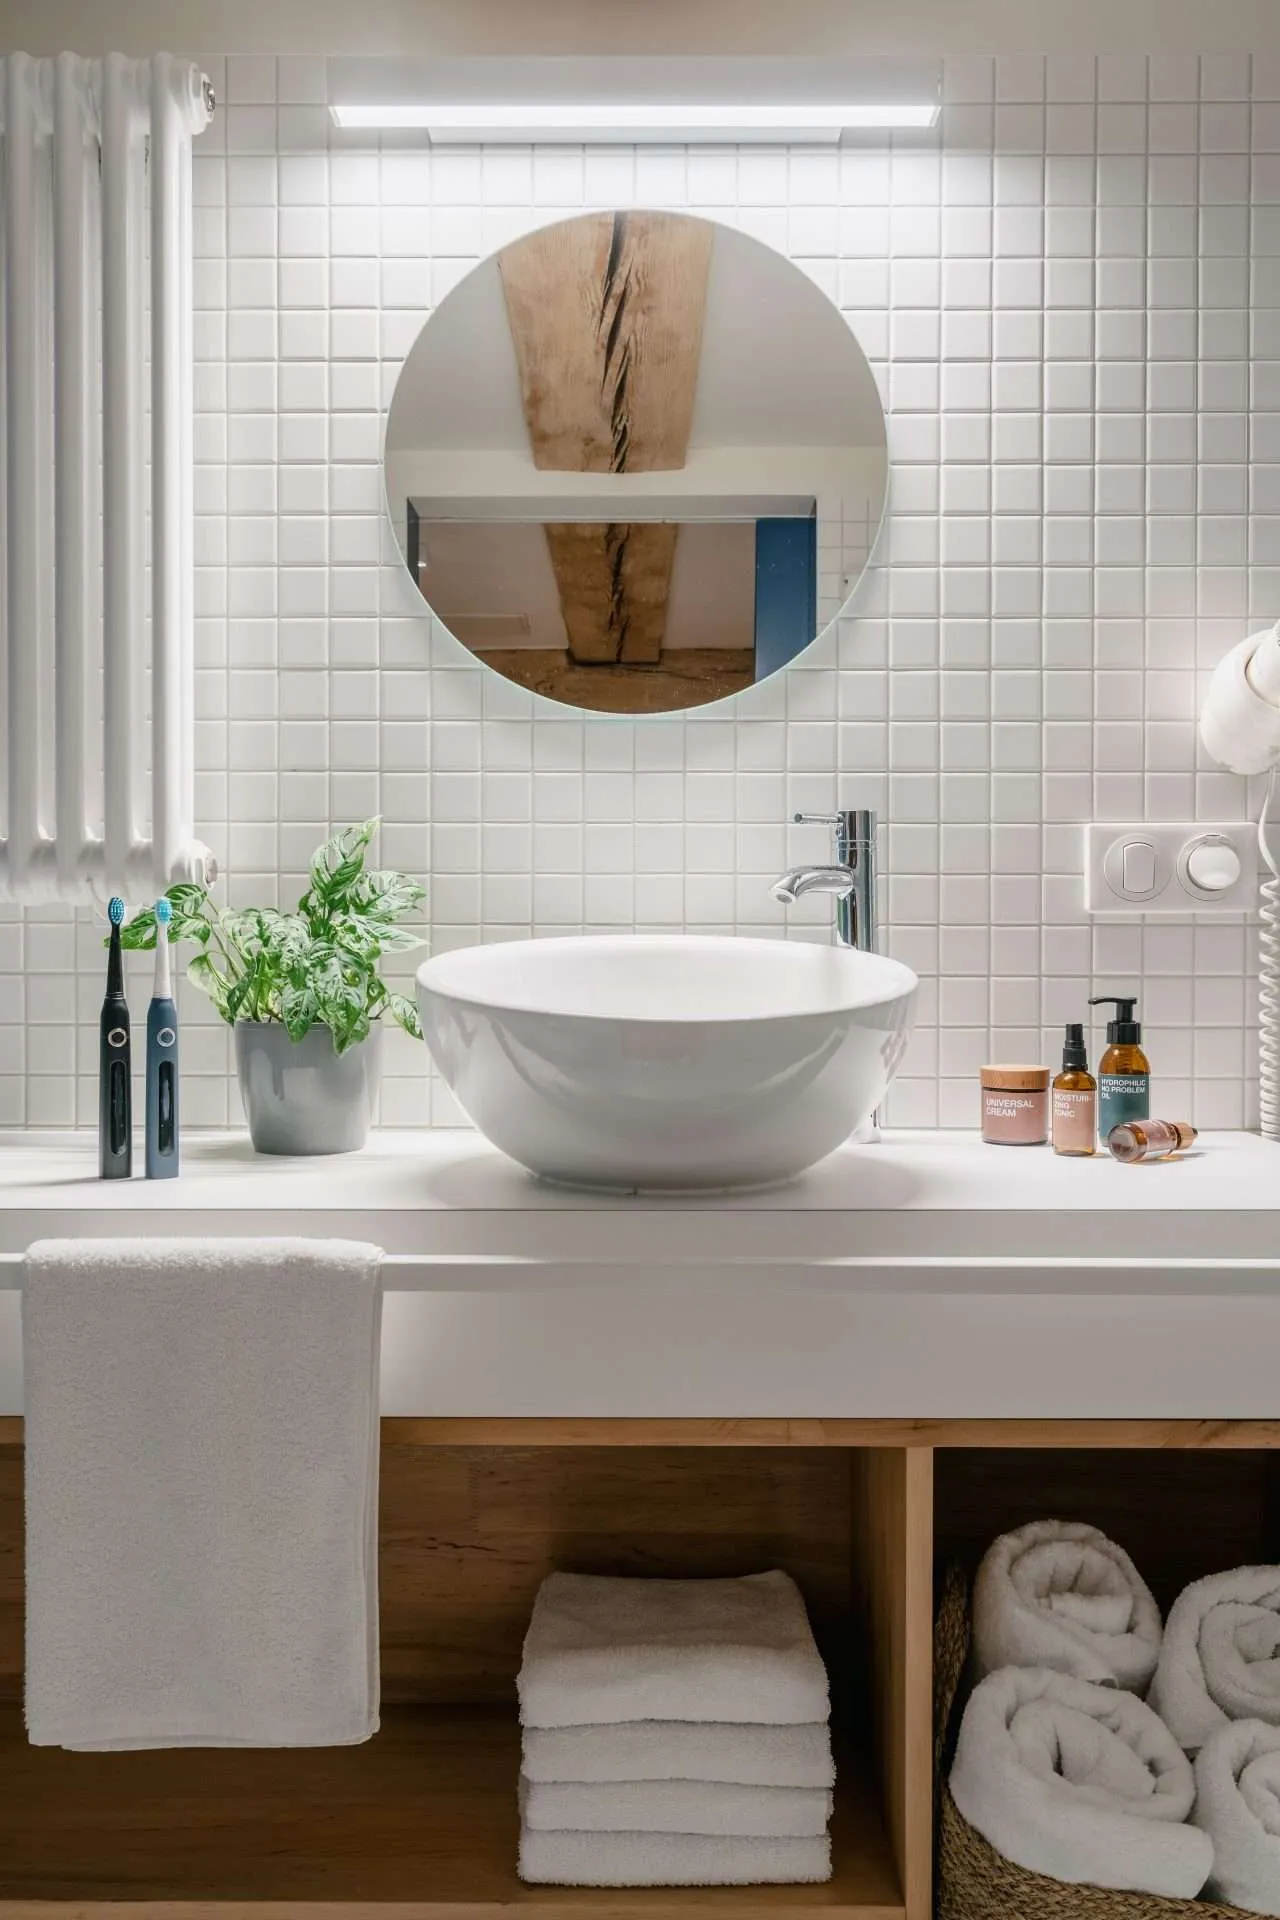 How To Choose The Right Vanity For Your Bathroom Remodel